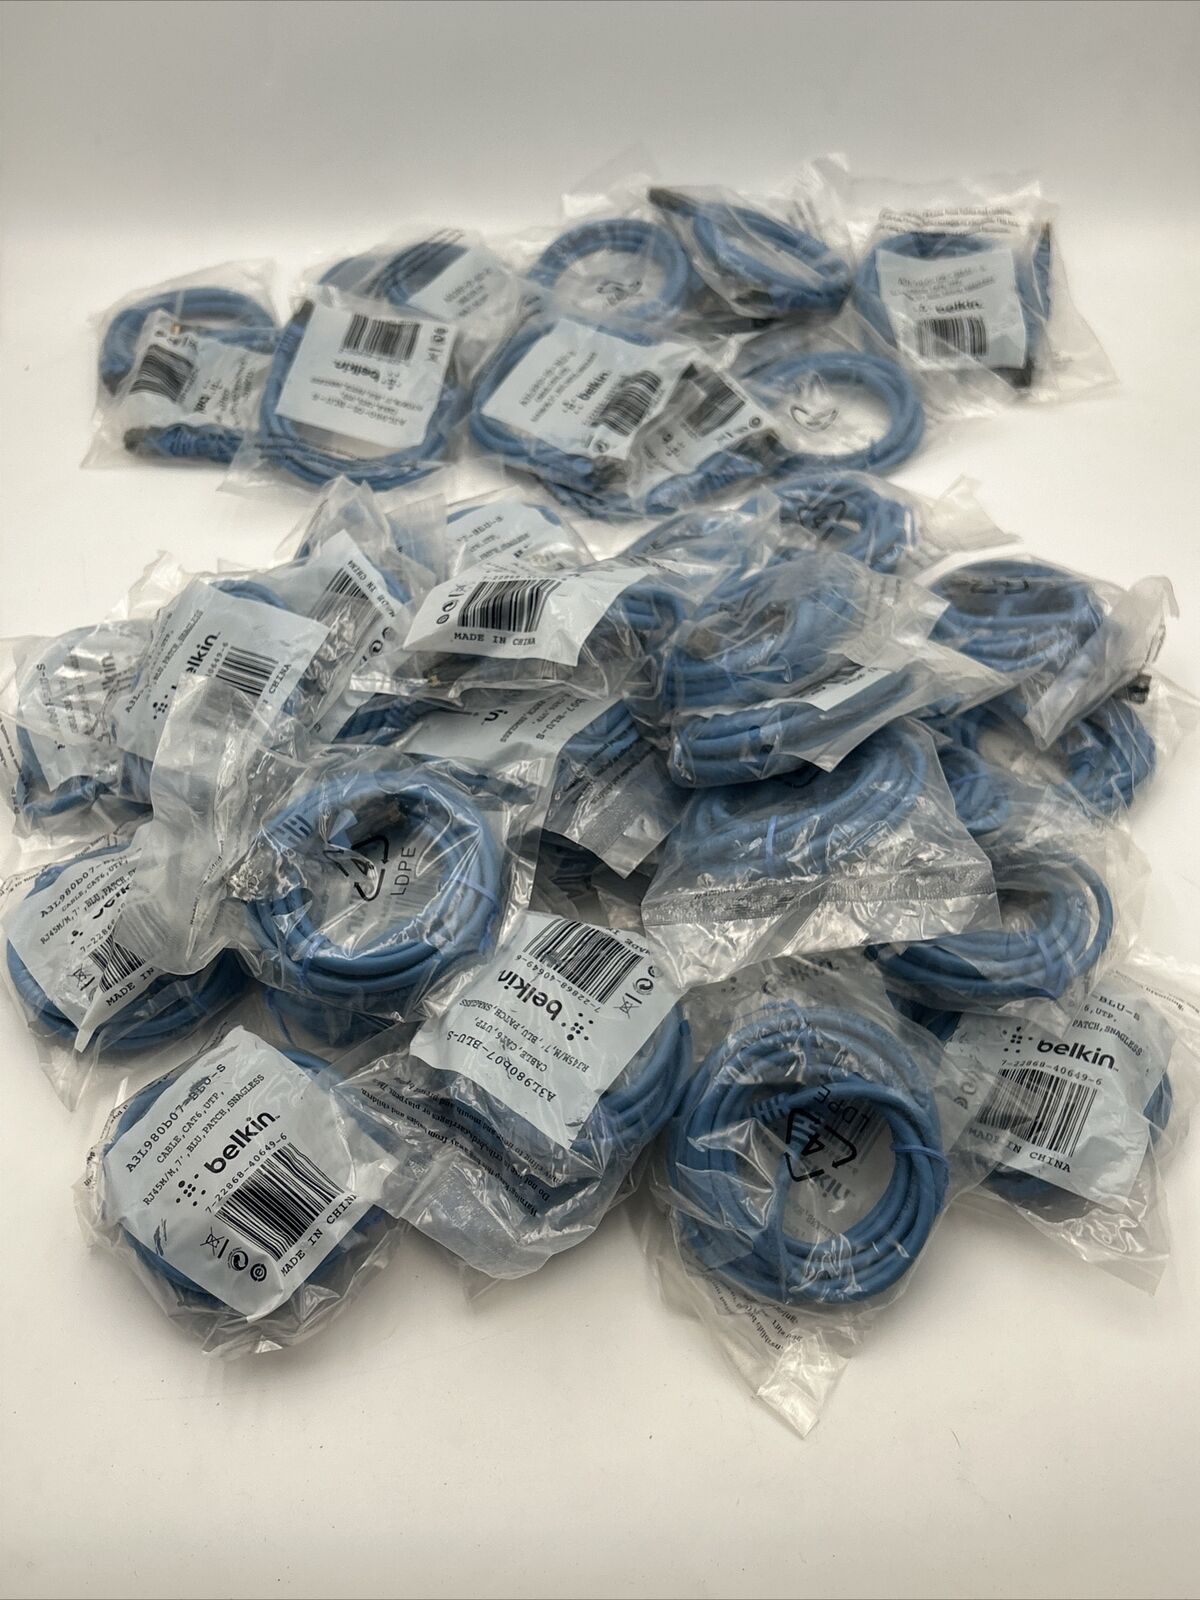 84  New HUGE Lot CDW Belkin 7'&5 FT Cat 6 Snagless Patch Cable RJ45M BLU / WHITE